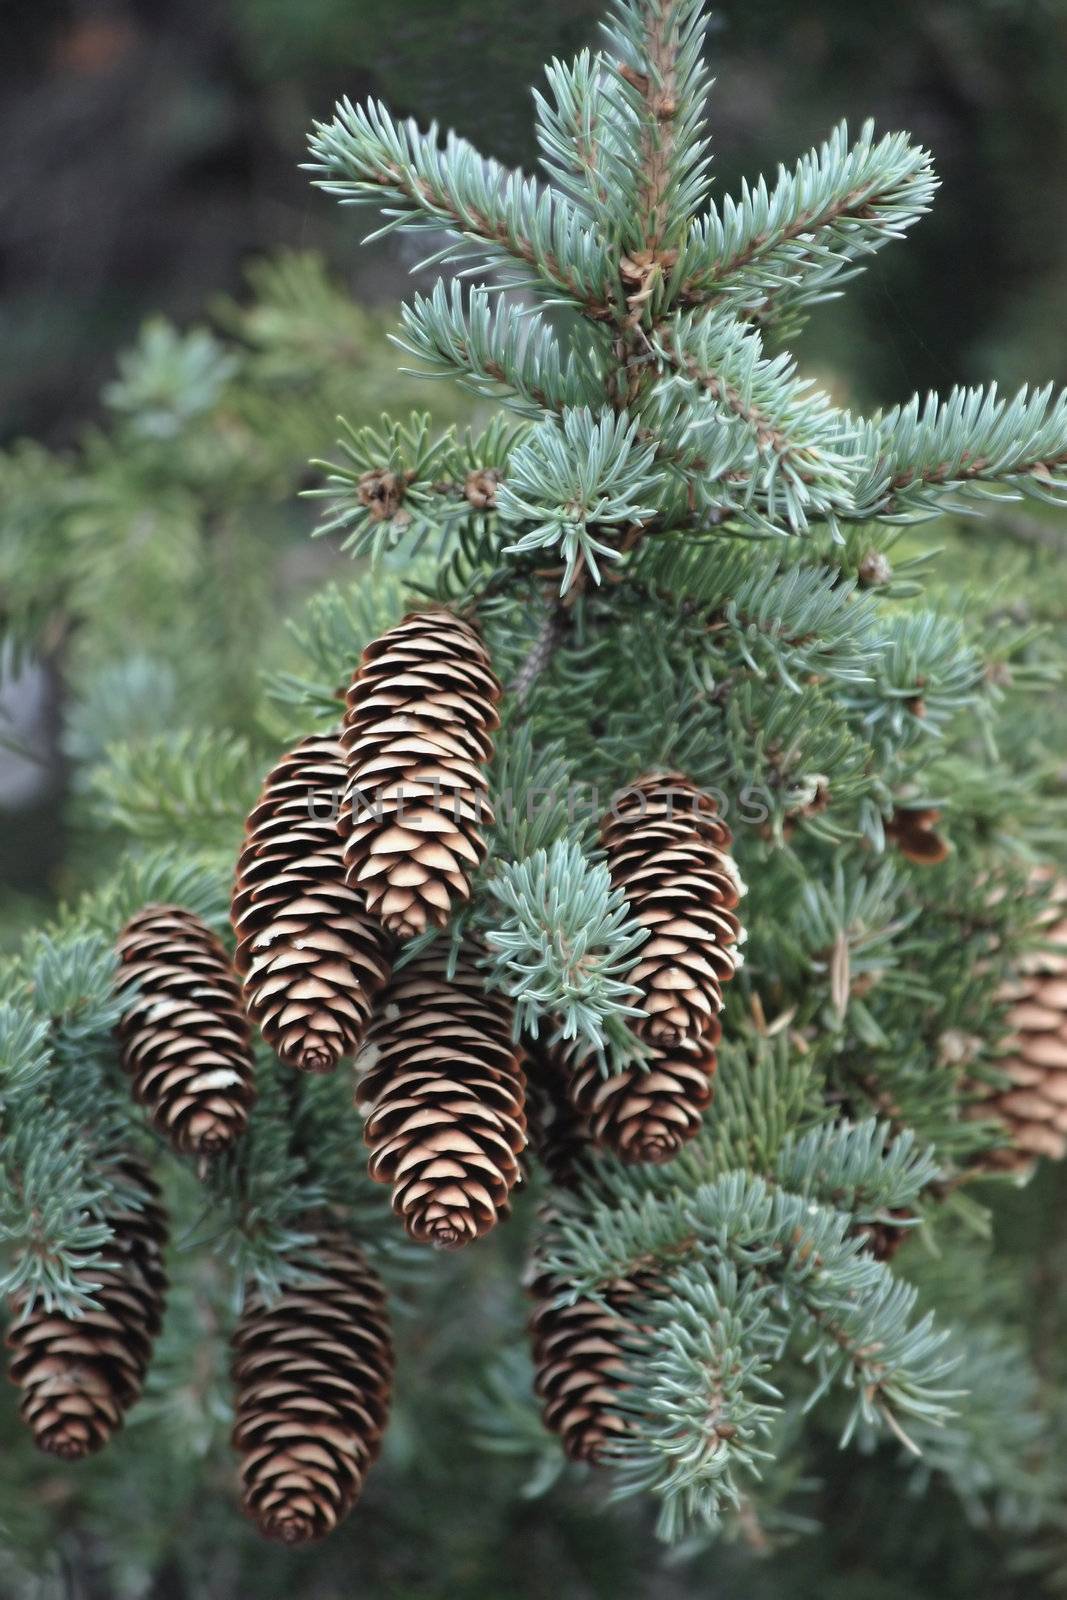  pine with green needle by zhannaprokopeva